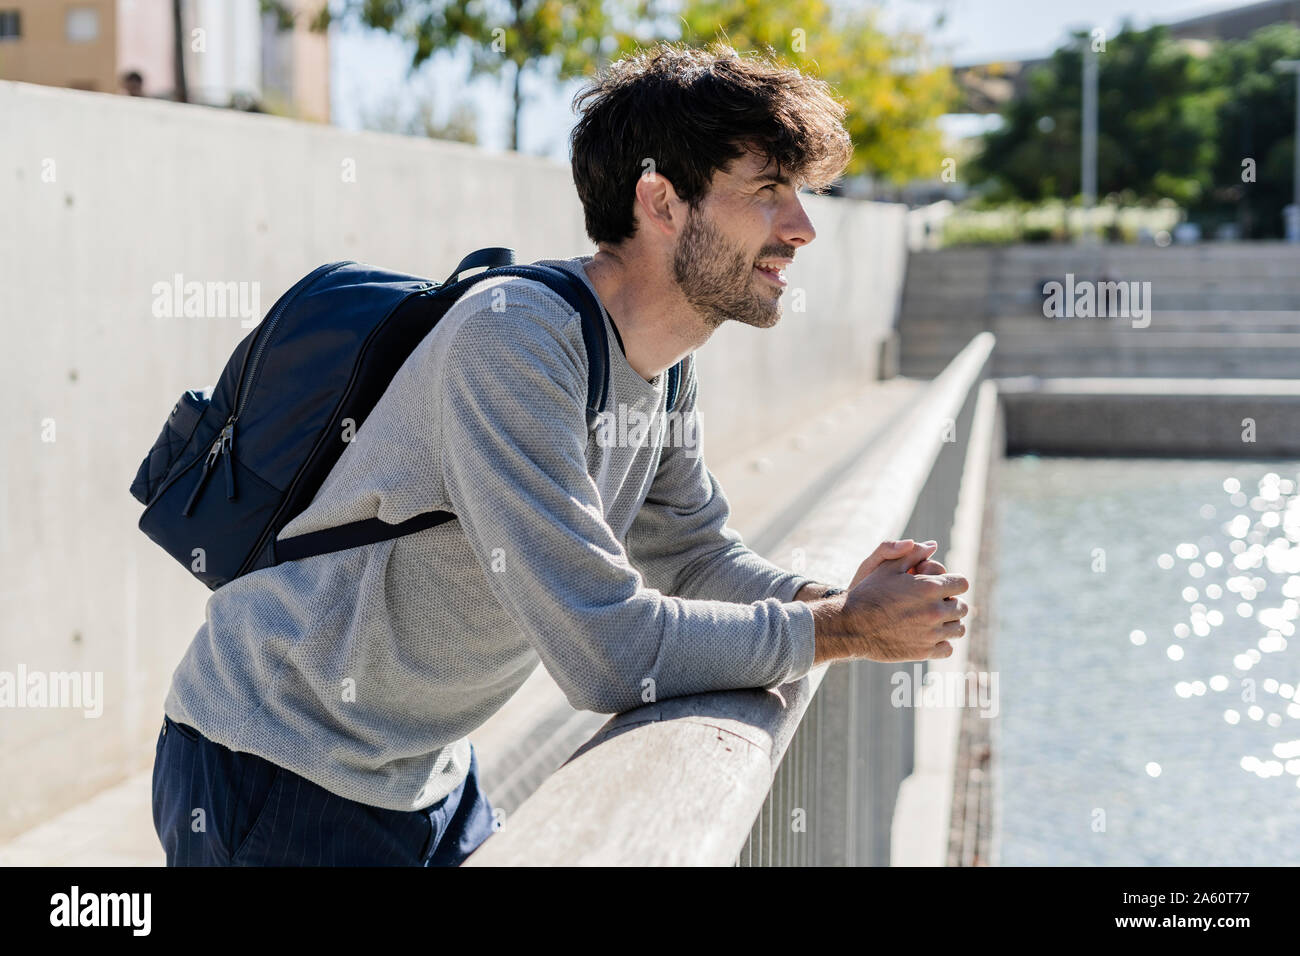 Man with backpack having a break in the city Stock Photo